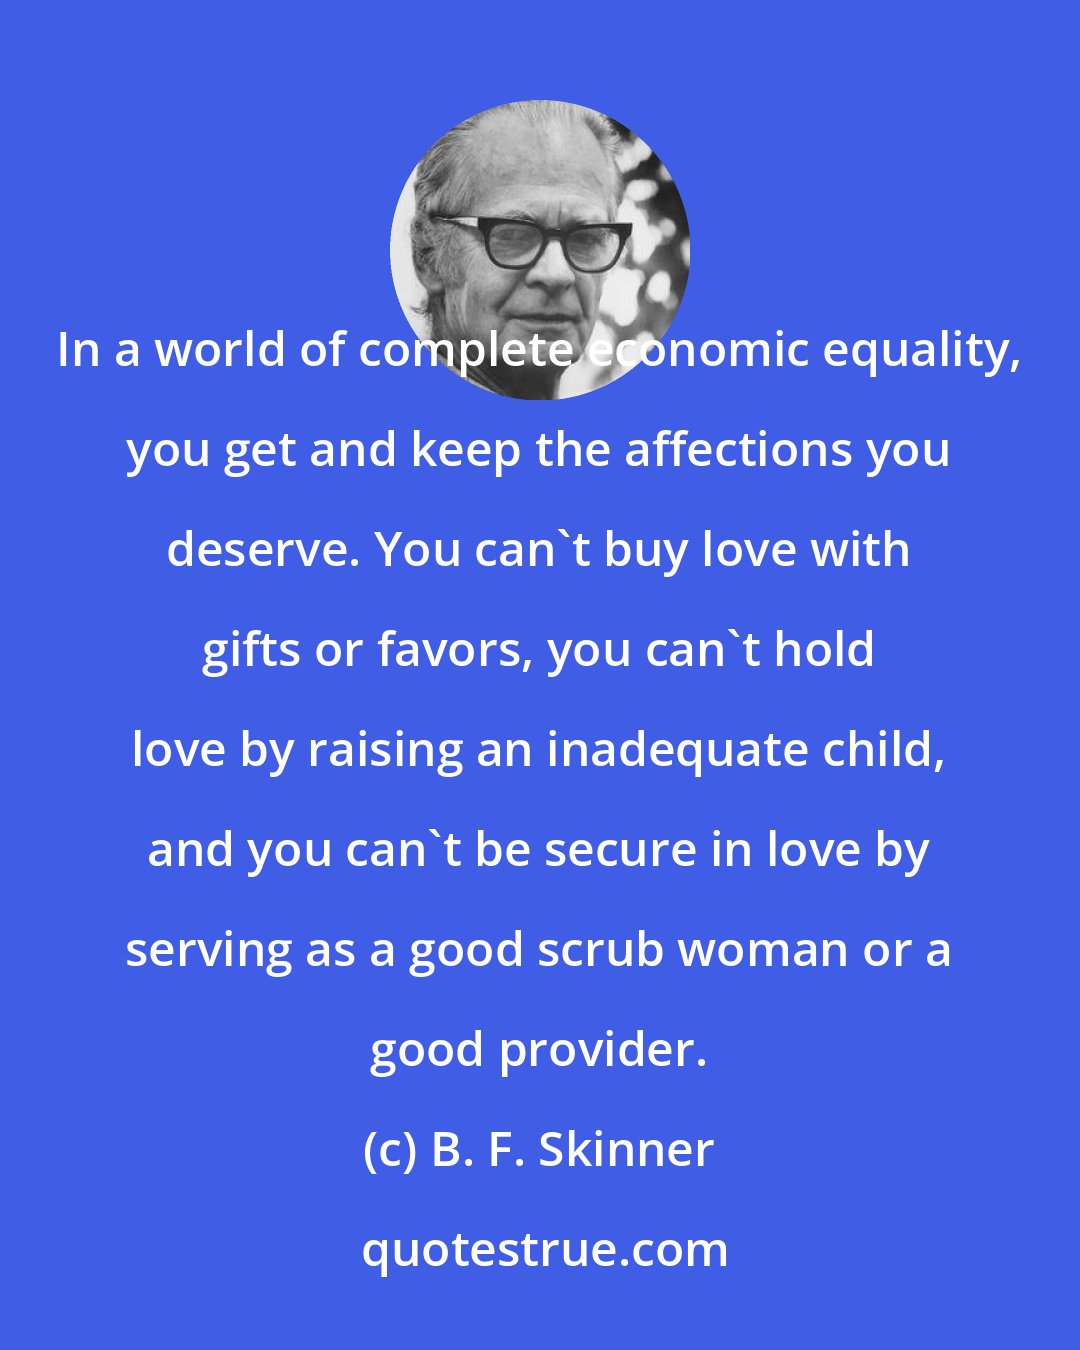 B. F. Skinner: In a world of complete economic equality, you get and keep the affections you deserve. You can't buy love with gifts or favors, you can't hold love by raising an inadequate child, and you can't be secure in love by serving as a good scrub woman or a good provider.